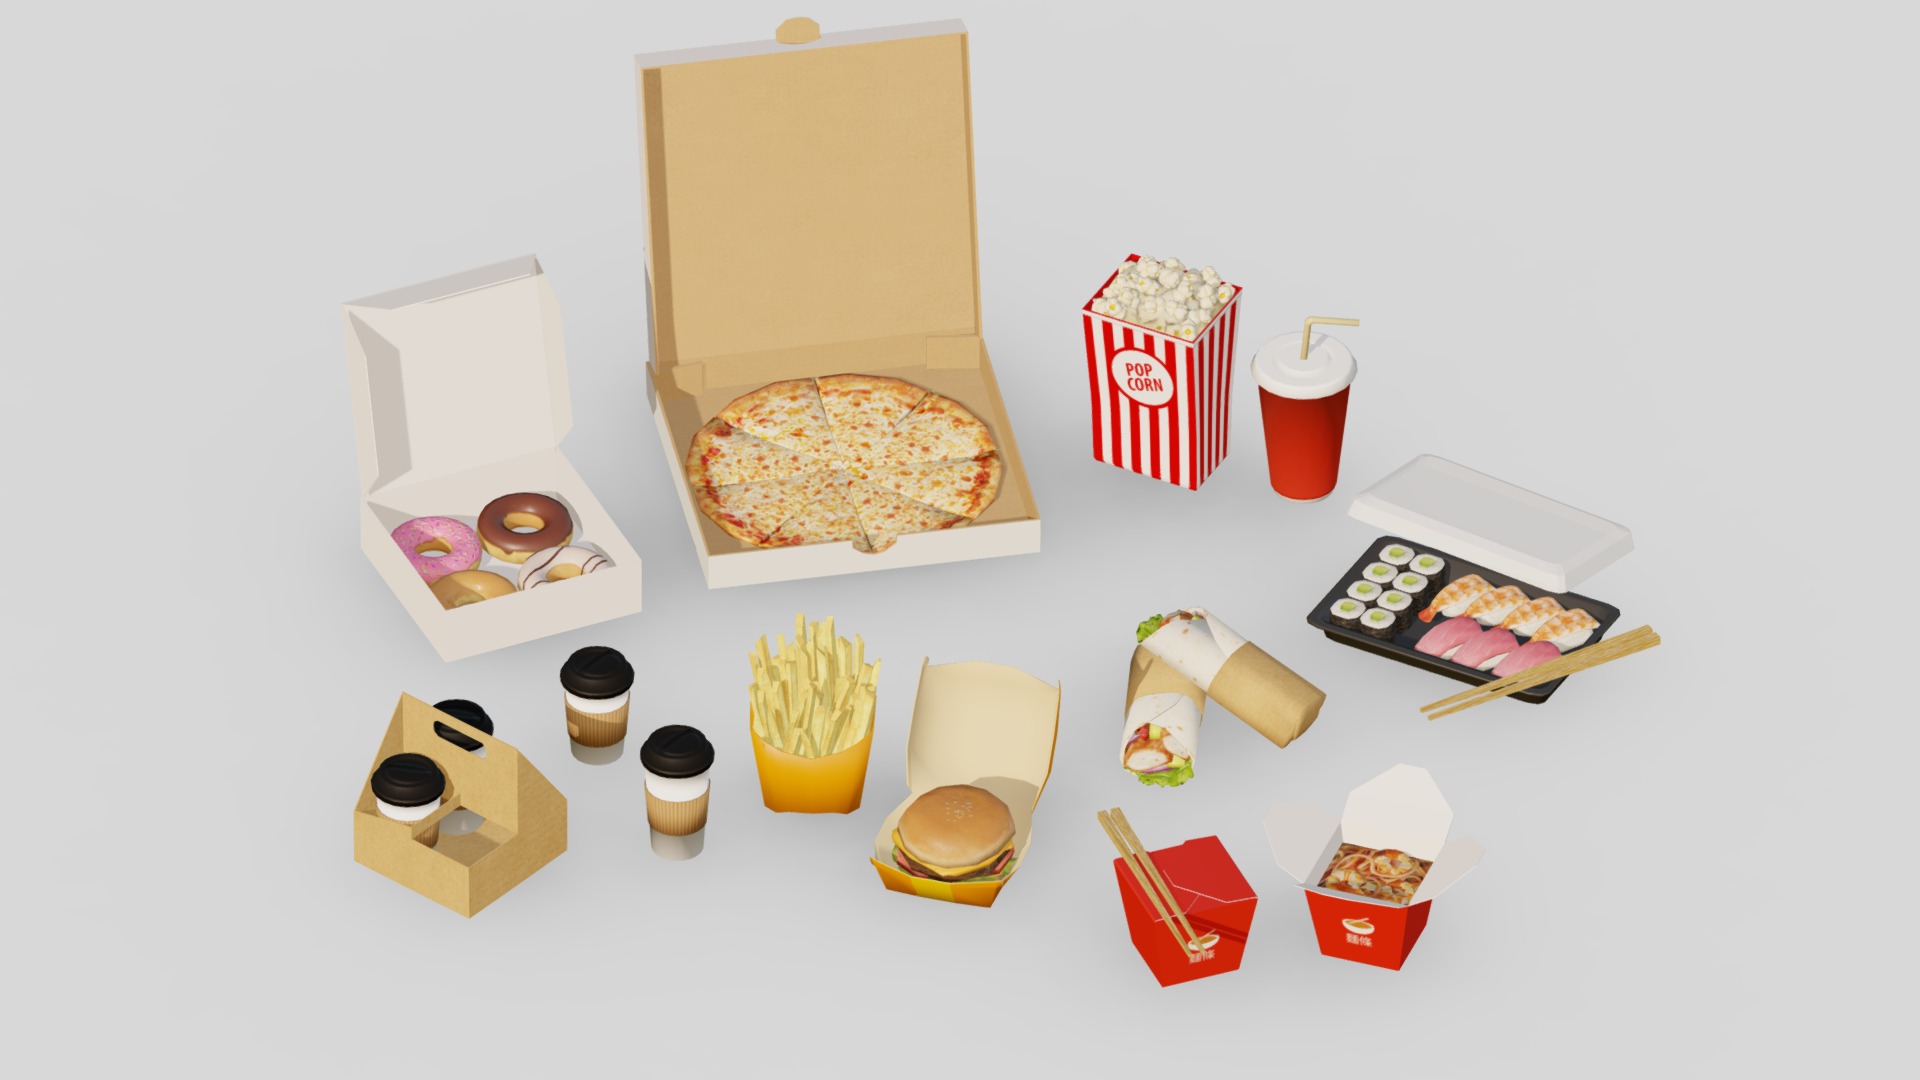 3D model Takeaway Fast Food G43 Low-poly - This is a 3D model of the Takeaway Fast Food G43 Low-poly. The 3D model is about a table with food and drinks on it.